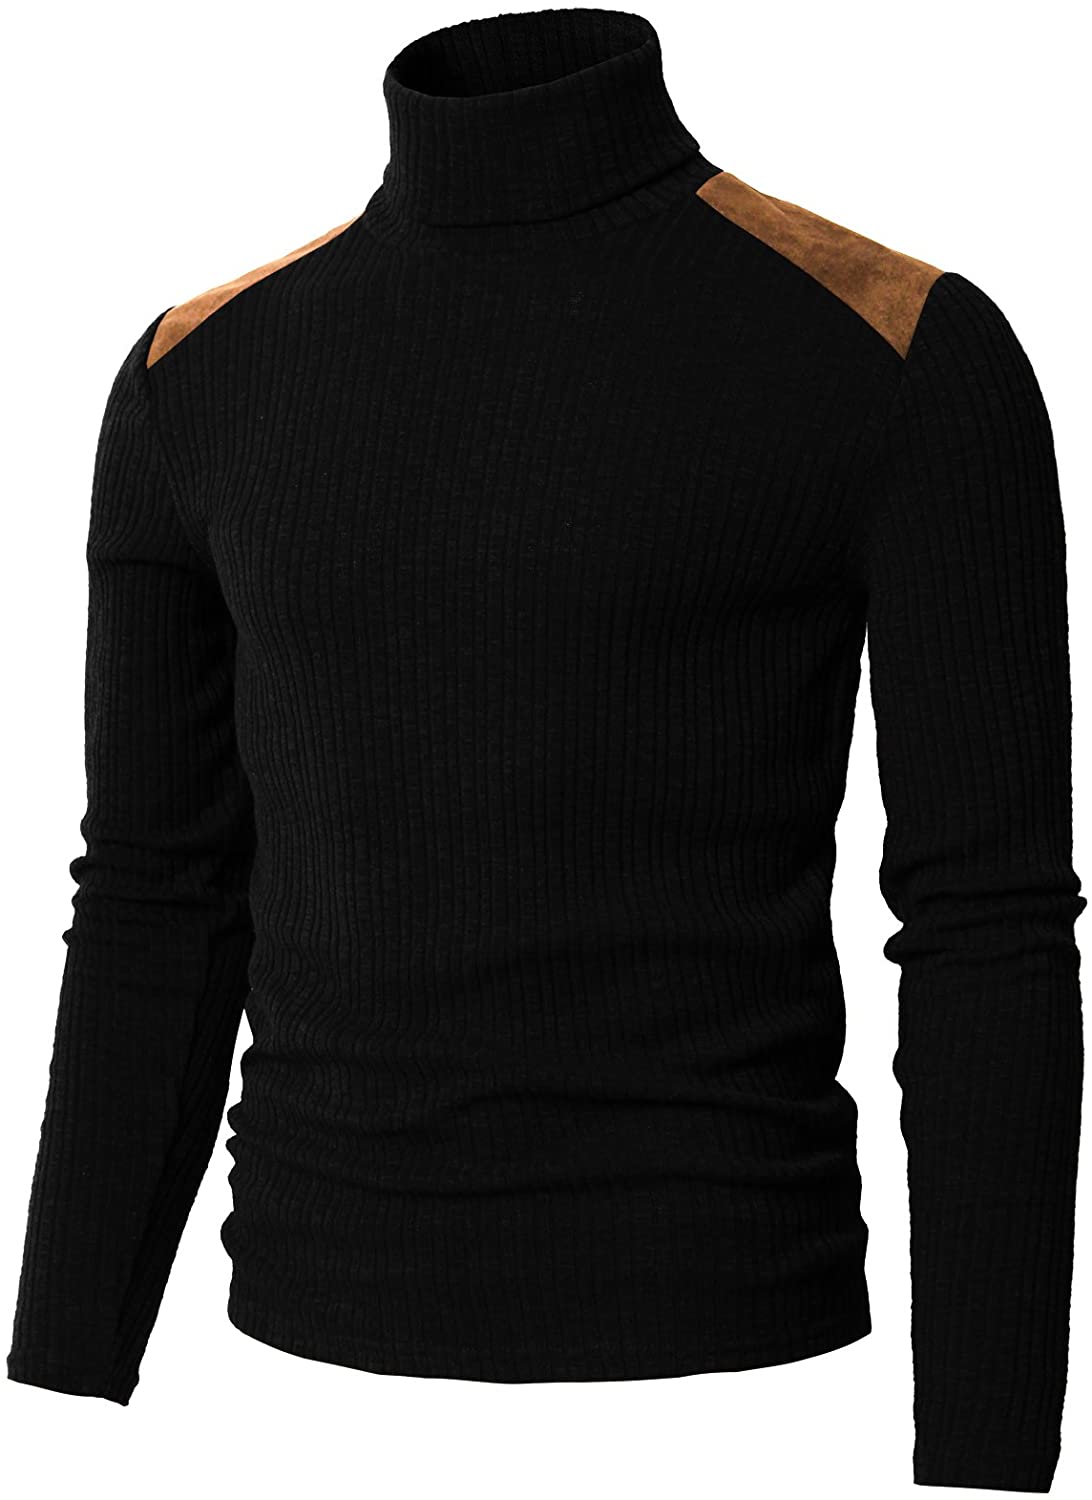 H2H Mens Slim Fit Turtleneck Pullover Sweaters Basic Tops Knitted ...